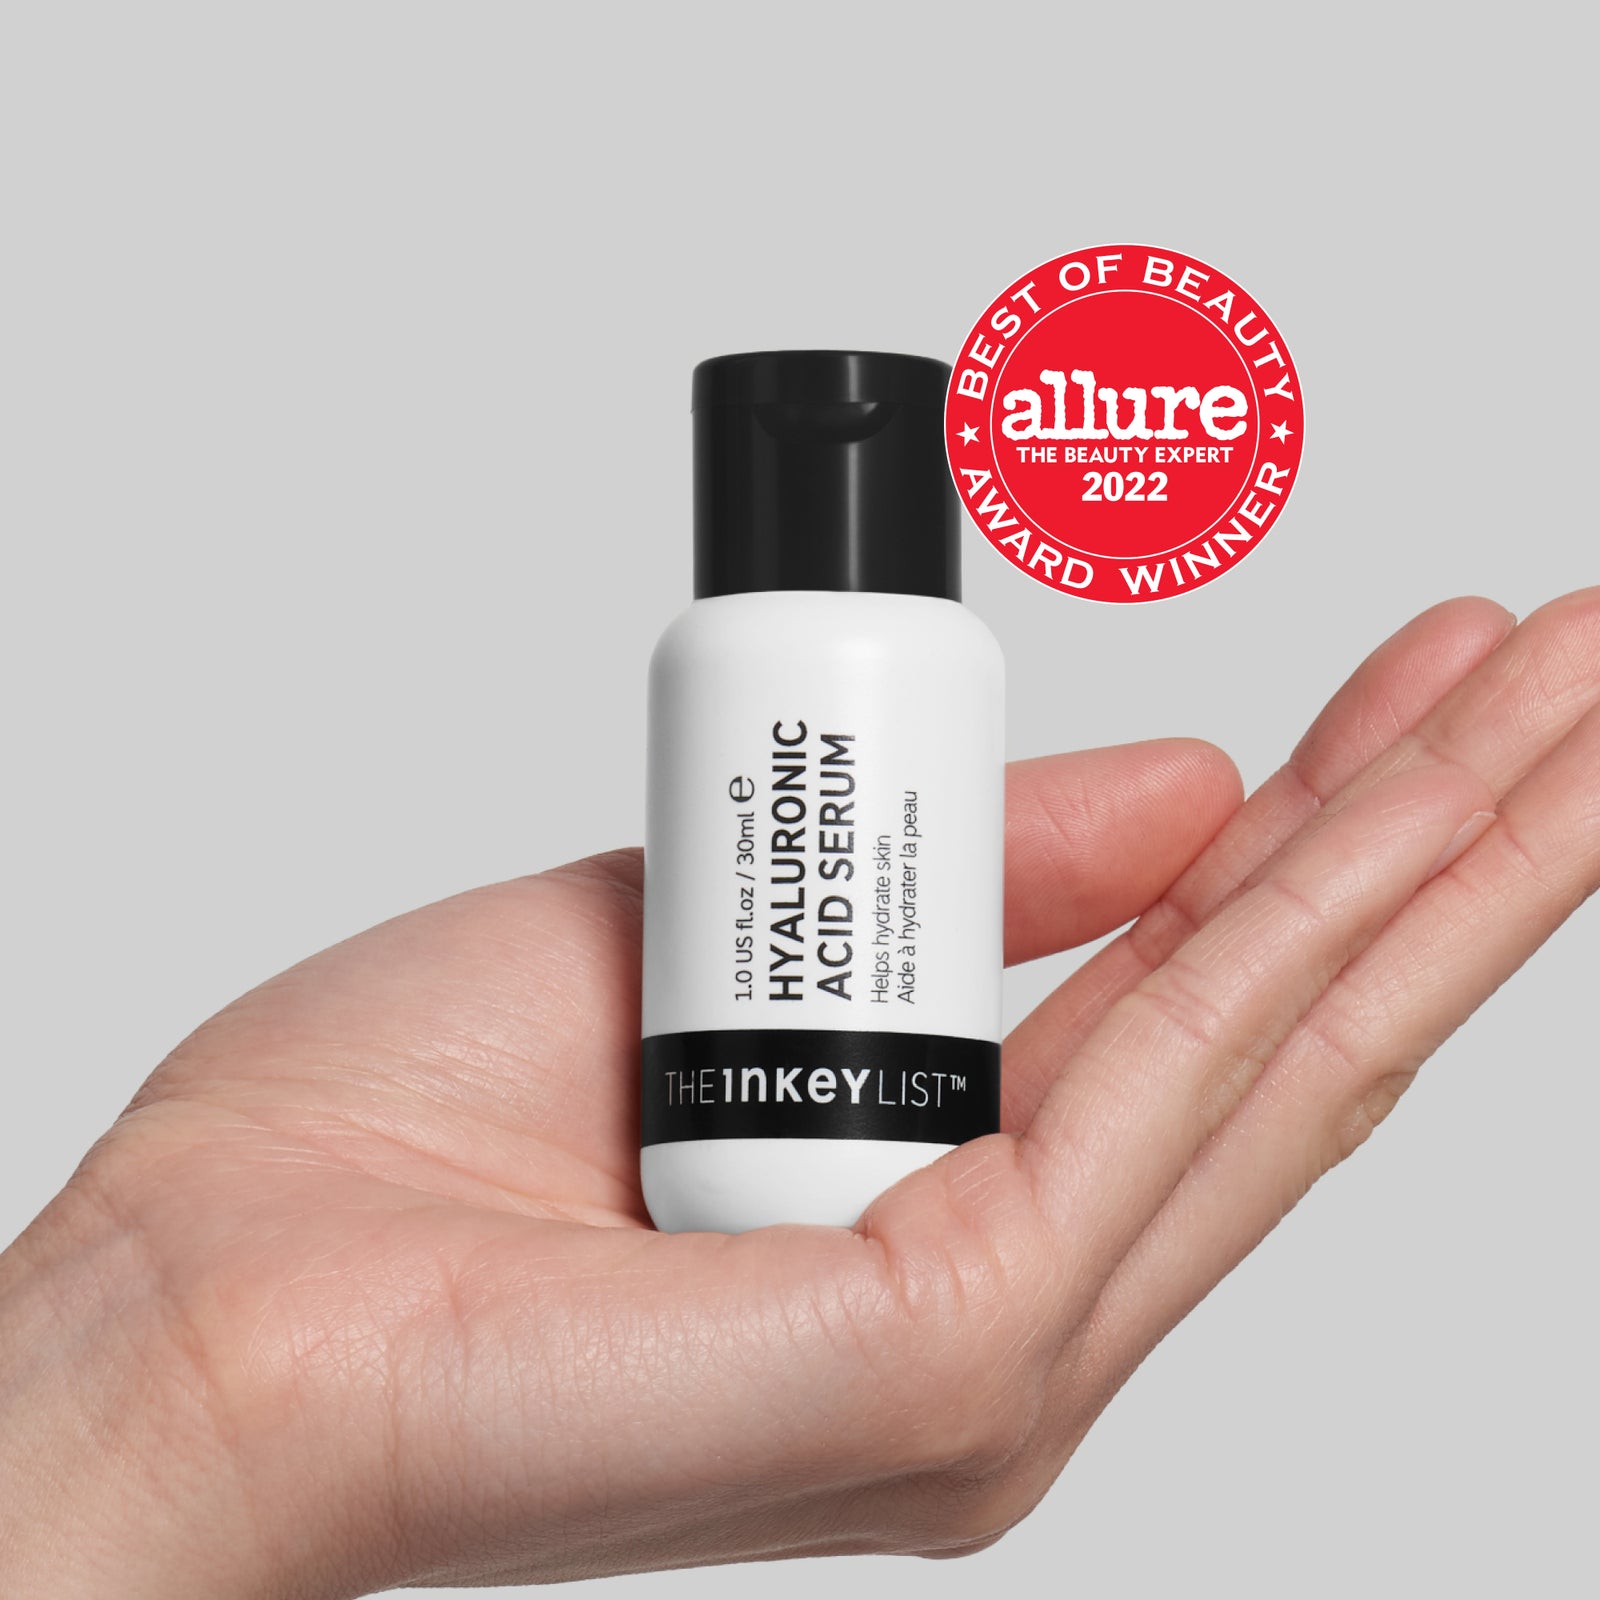 Hyaluronic Acid hand shot with Allure 2022 badge